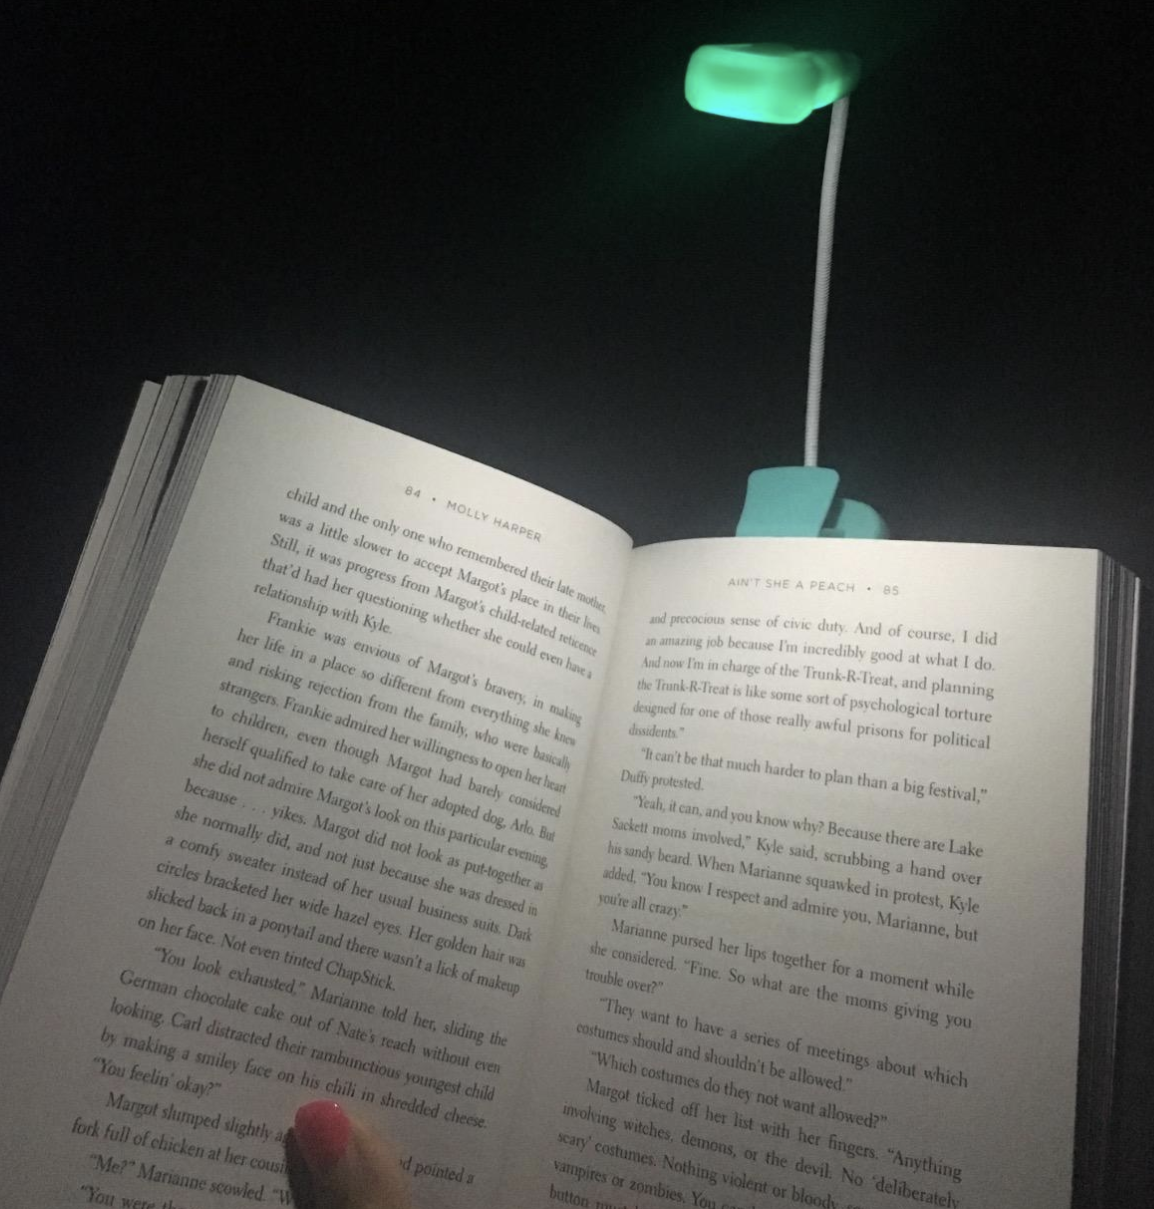 a reviewer photo of the light brightening up a book page in the dark